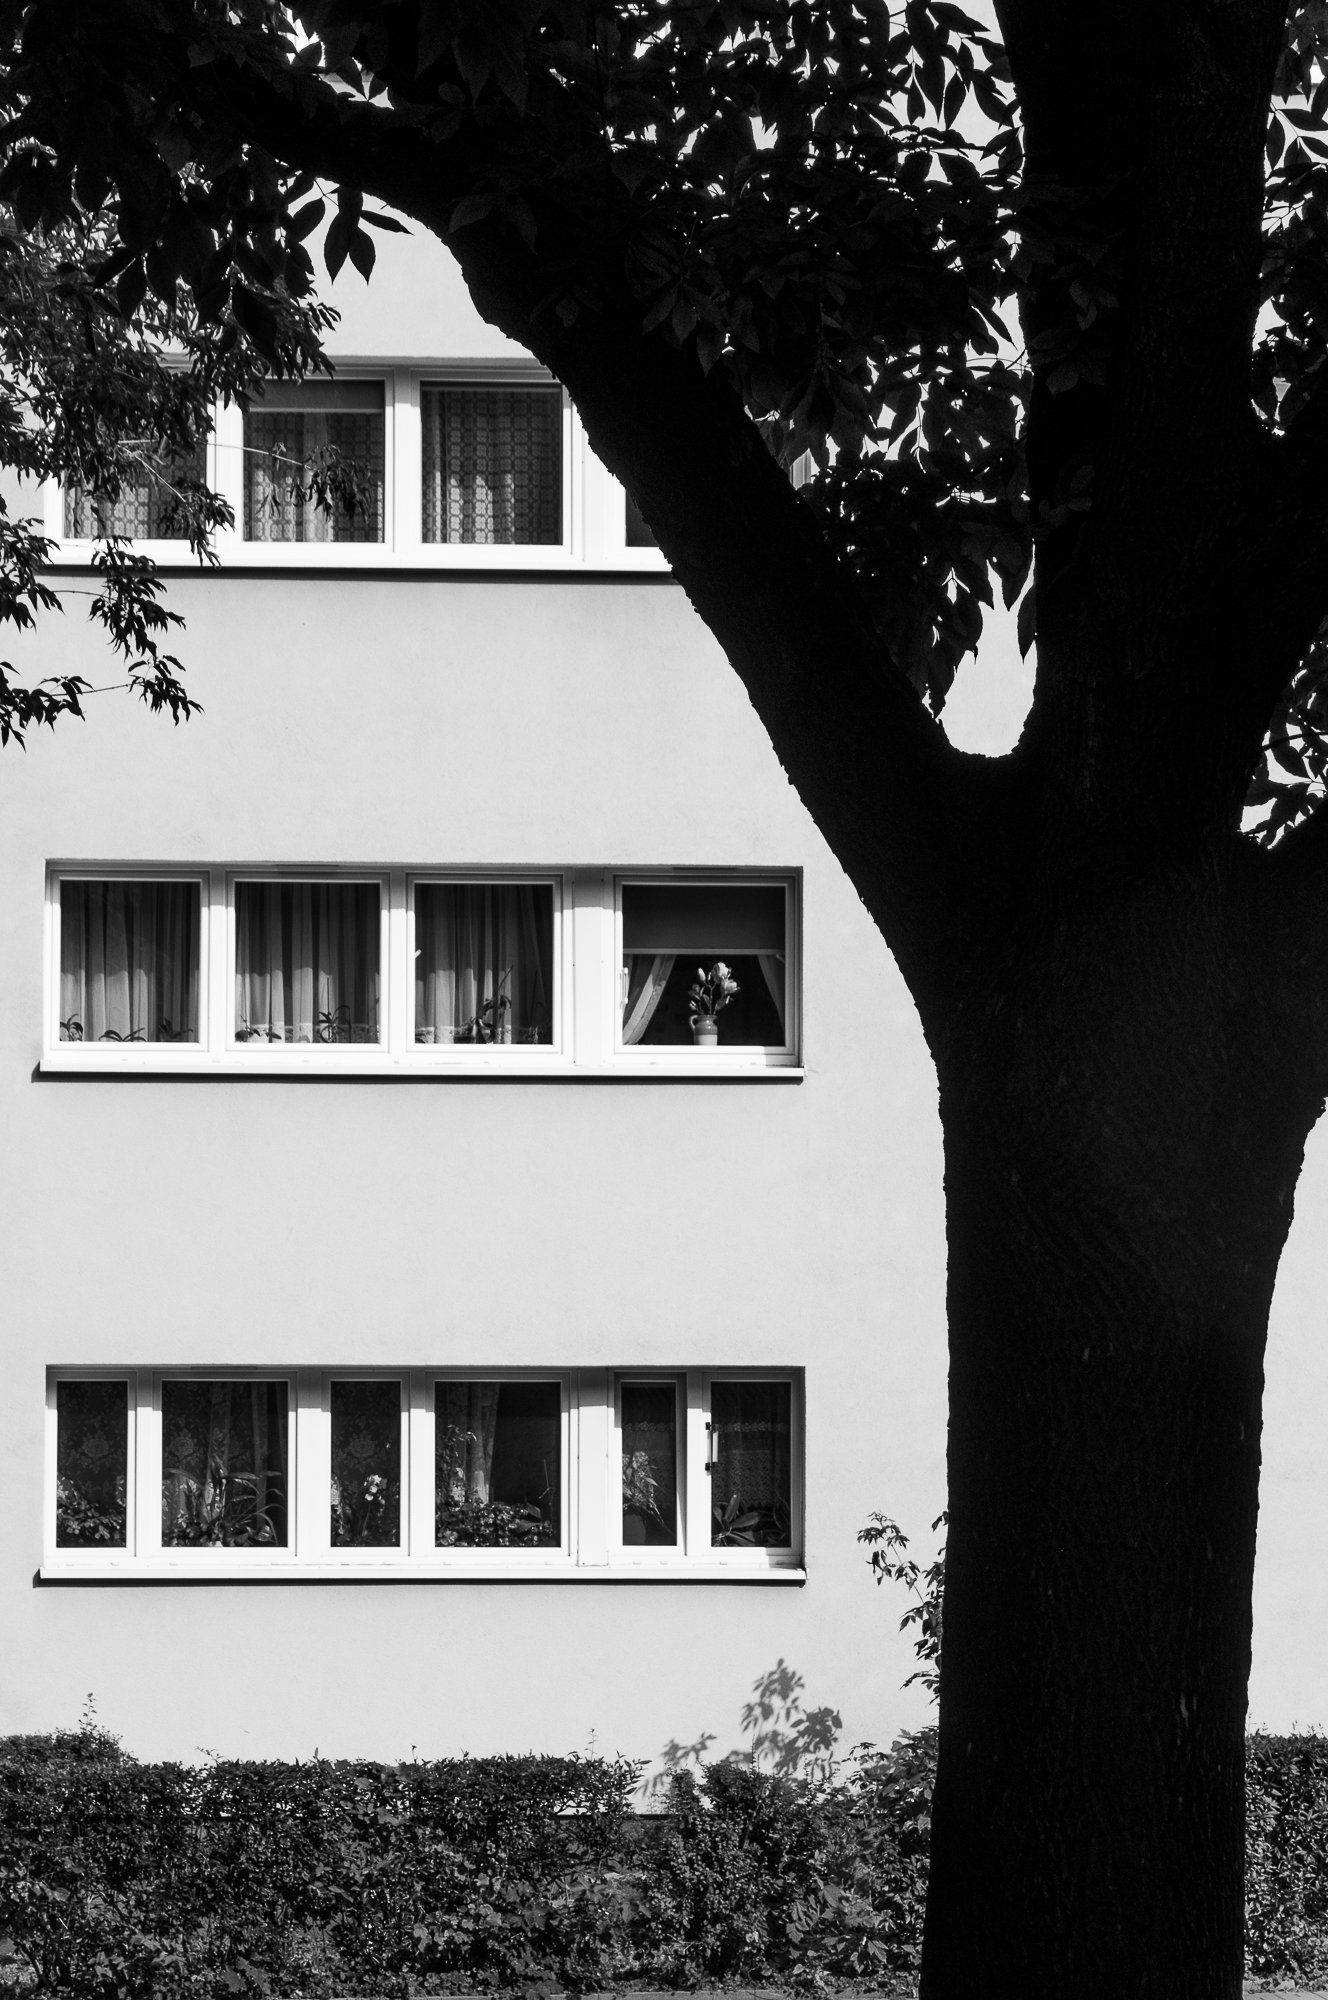 Adam Mazek Photography 2021. Warsaw Street Photography. Post: "Why do I take pictures?" Minimalism. Tree and windows.